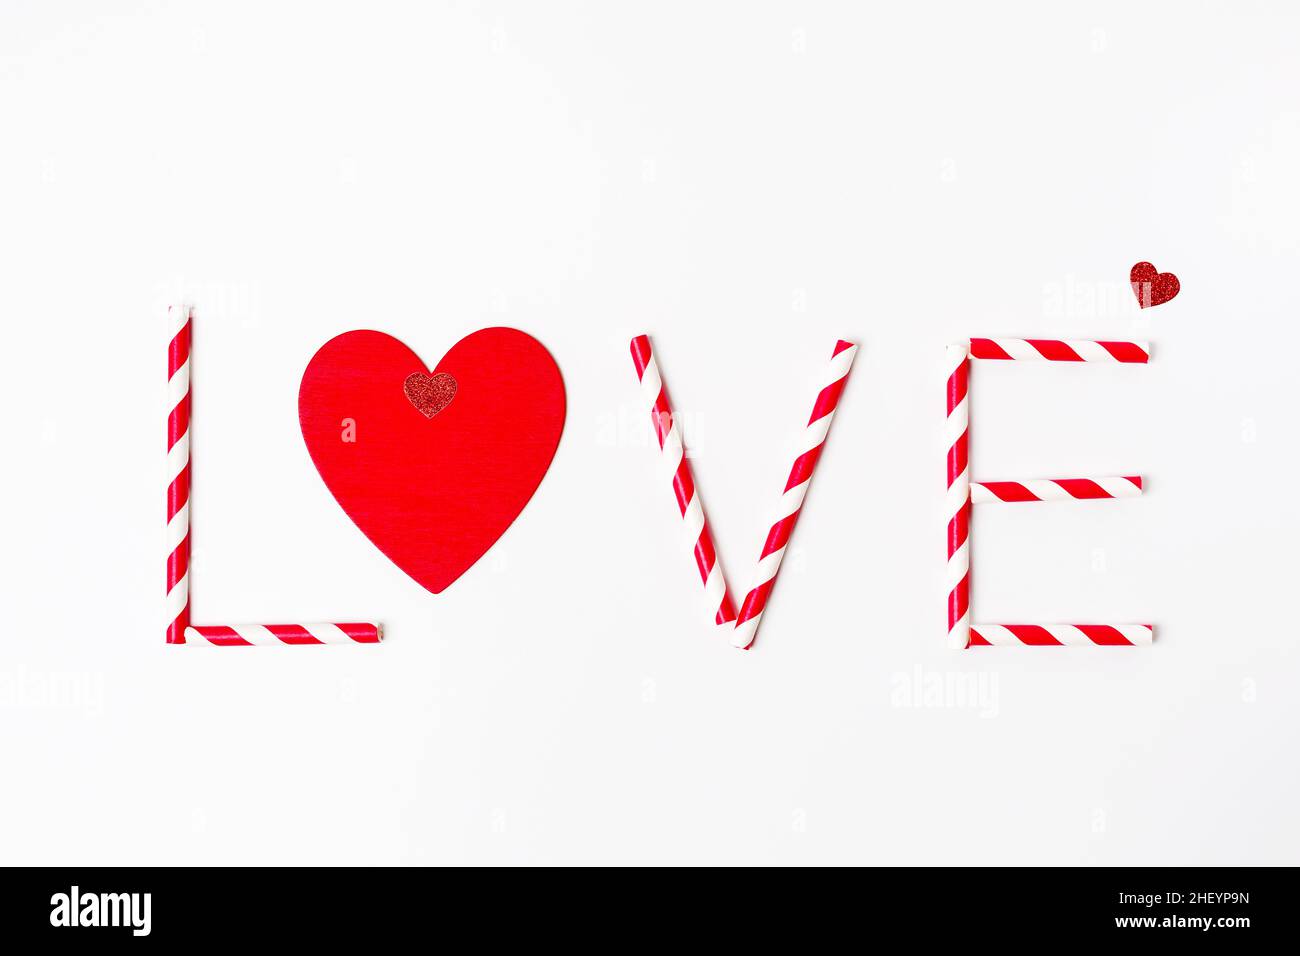 Saint Valentine`s day greeting card, text Love made from striped red and white drinking straws and red heart on white background Stock Photo